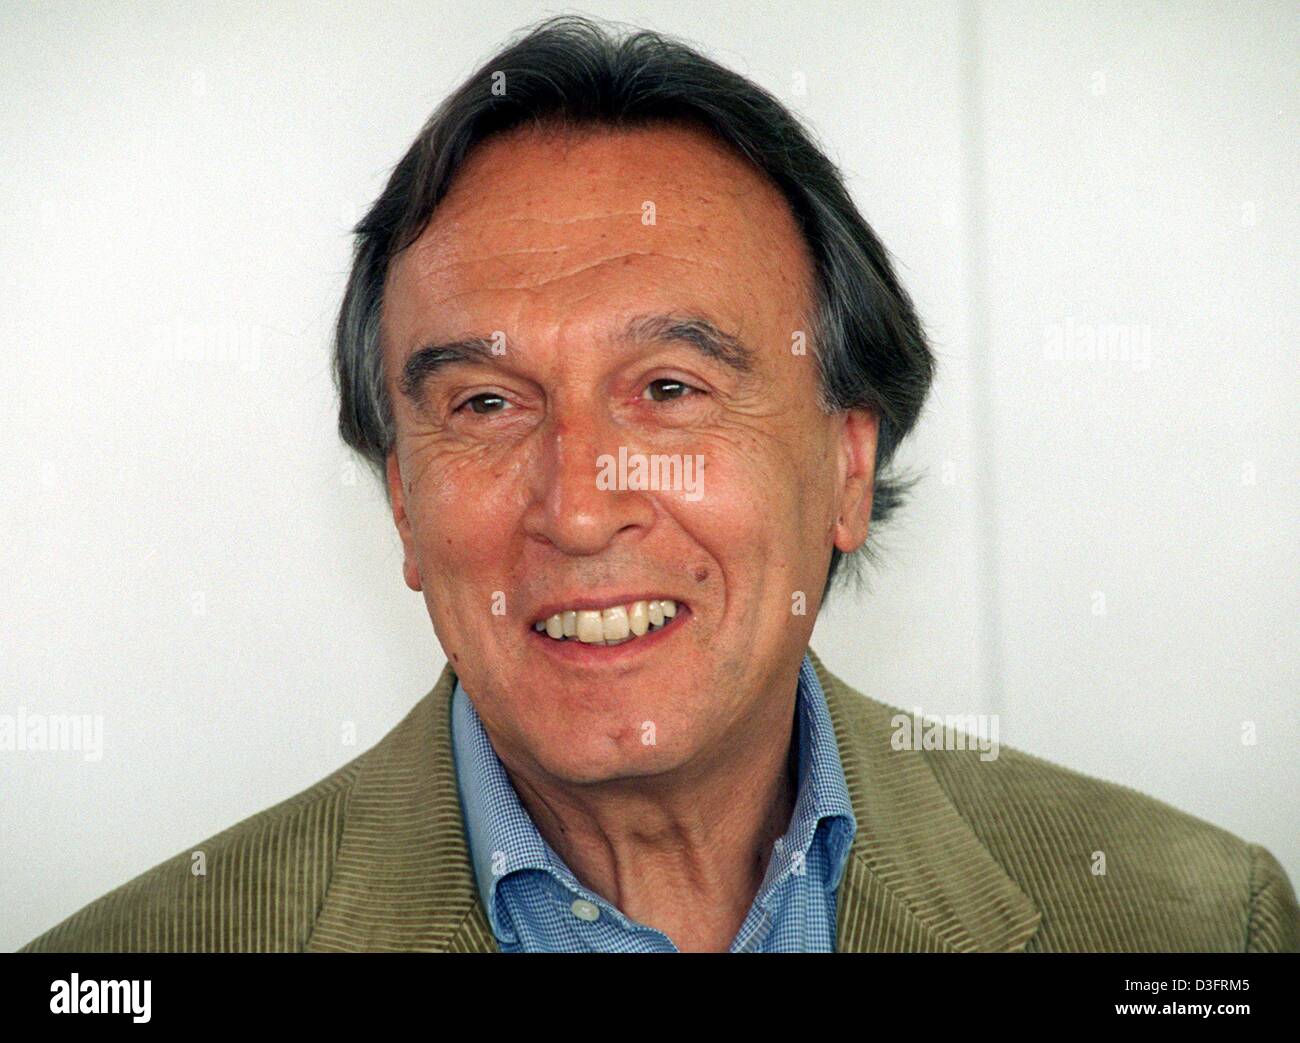 (dpa files) - Italian conductor Claudio Abbado smiles during a press conference in Berlin, 27 April 1998. Abbado was born in Milan, Italy, on 26 June 1933. He studied piano at the conservatory in Milan before beginning to conduct in Vienna. In 1960 he made his debut at La Scala in his native Milan in 1960 and served as music director there from 1968 to 1986. In 1989 he succeeded H. Stock Photo